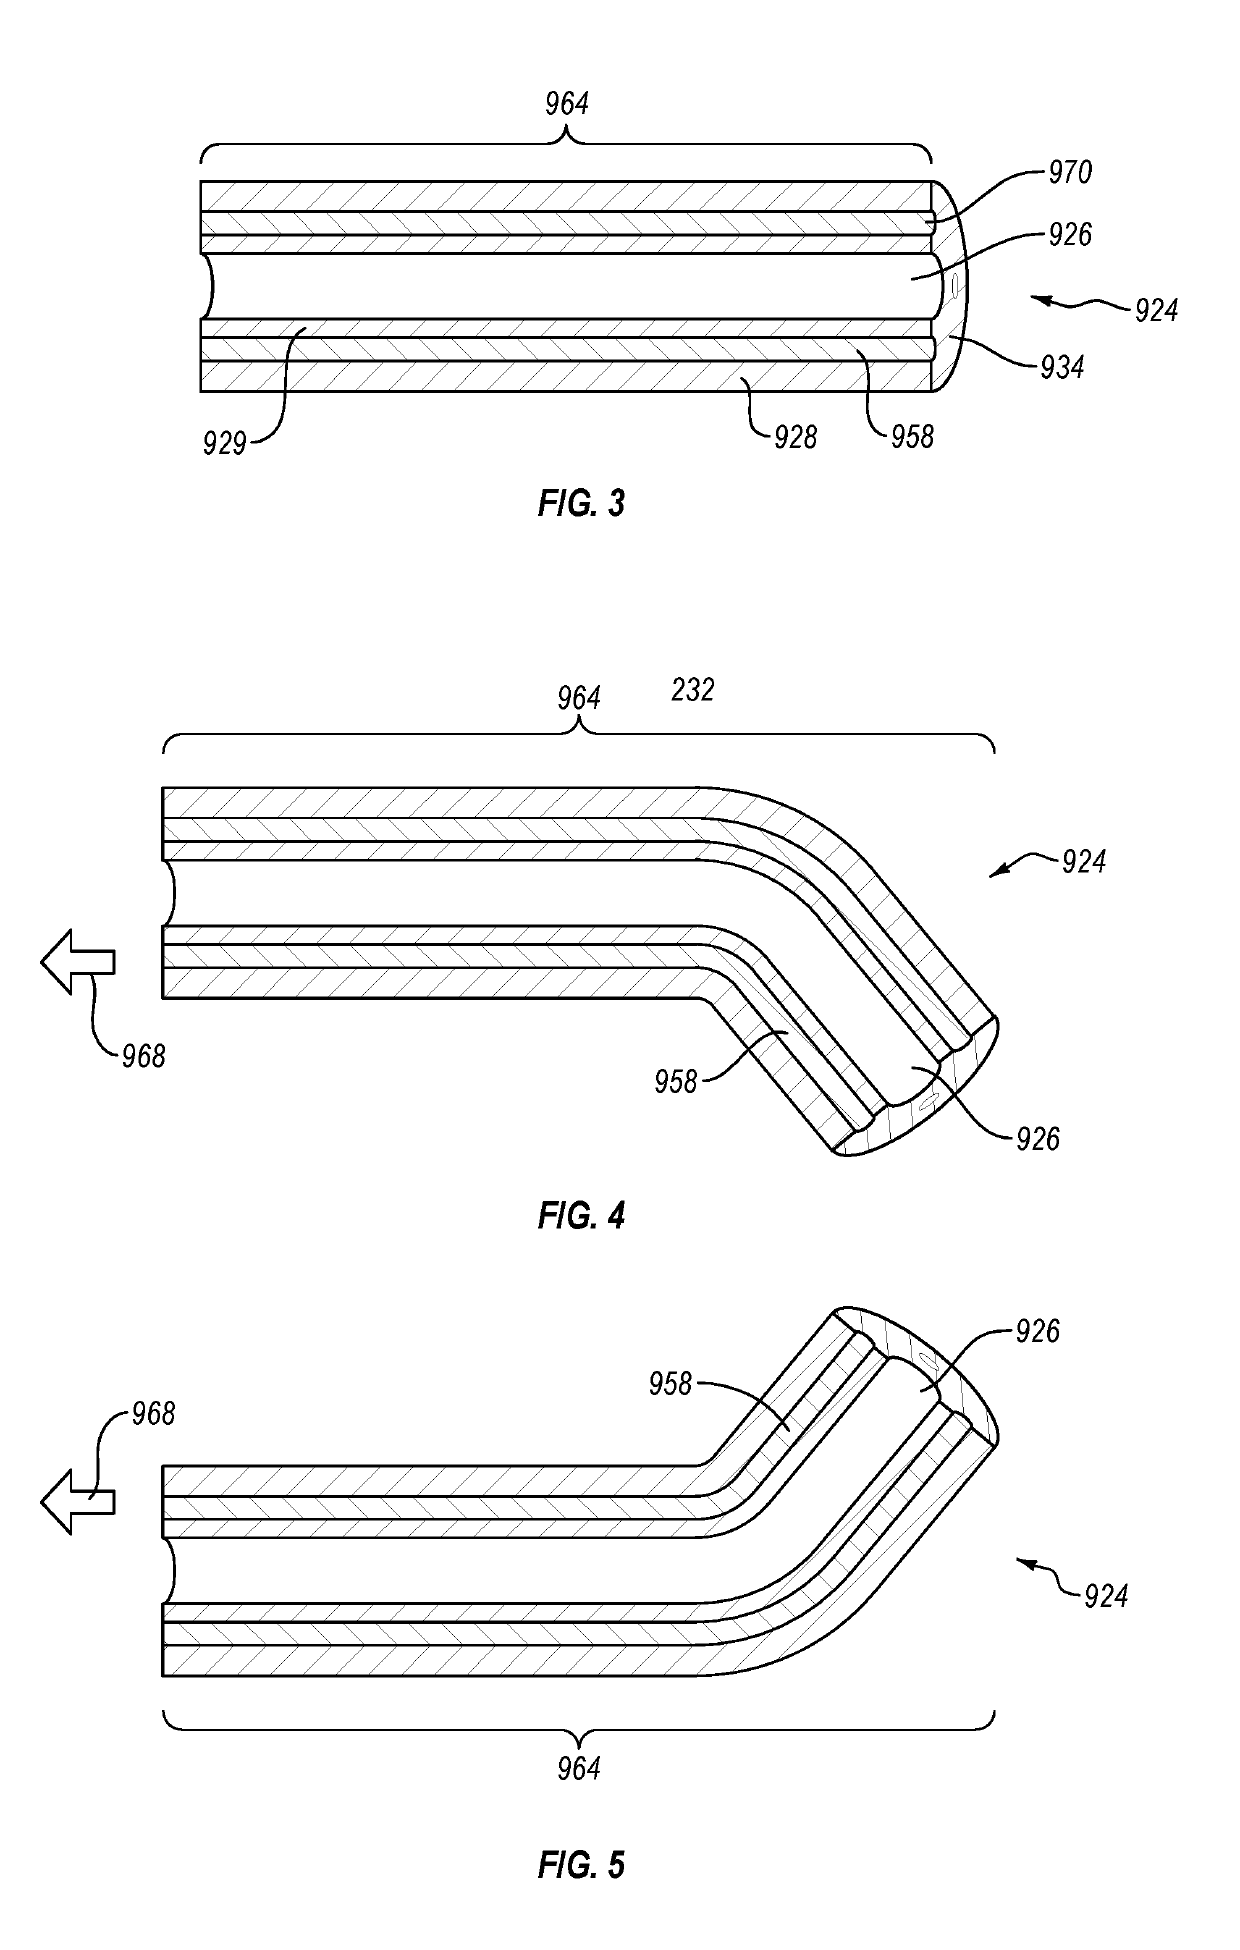 Cardiac implant delivery system